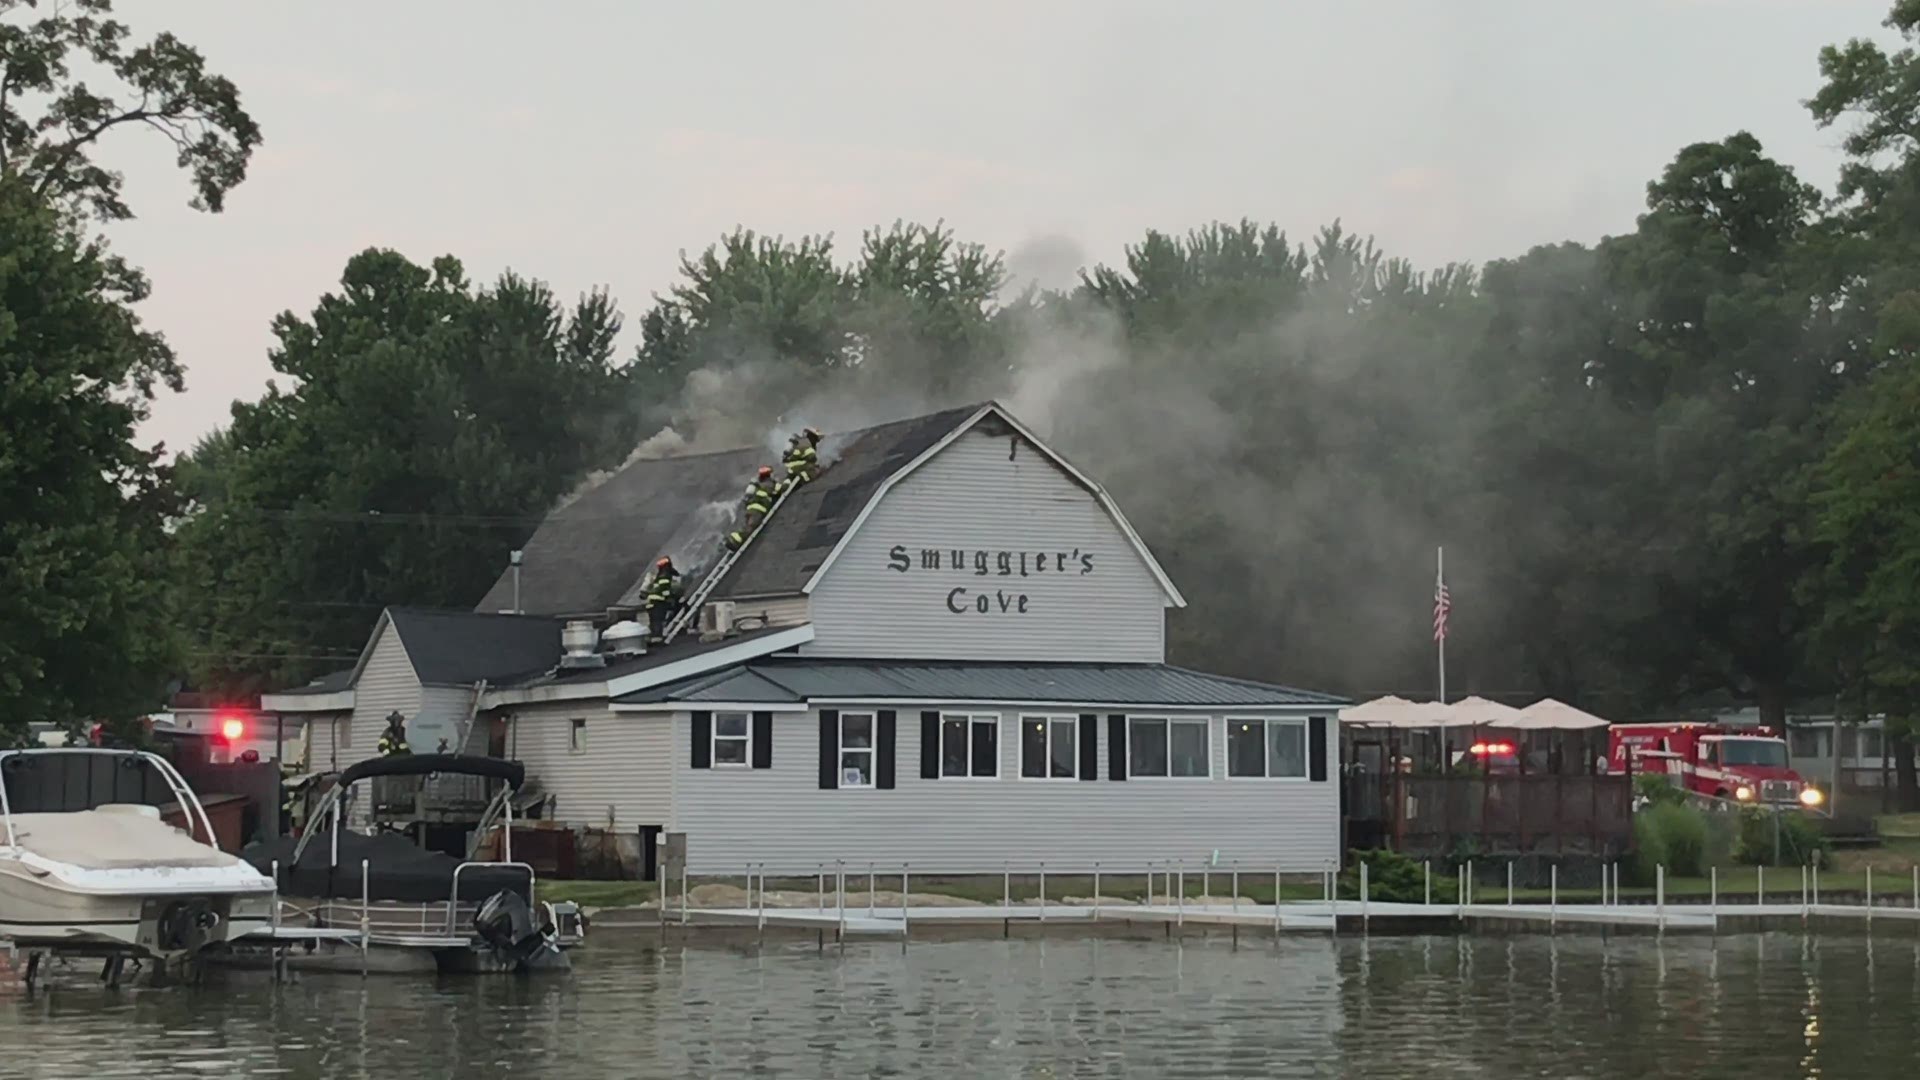 Fire at Smuggler's Cove on Tuesday, Aug. 14, 2018. Video courtesy of PJ Bevelaqua.